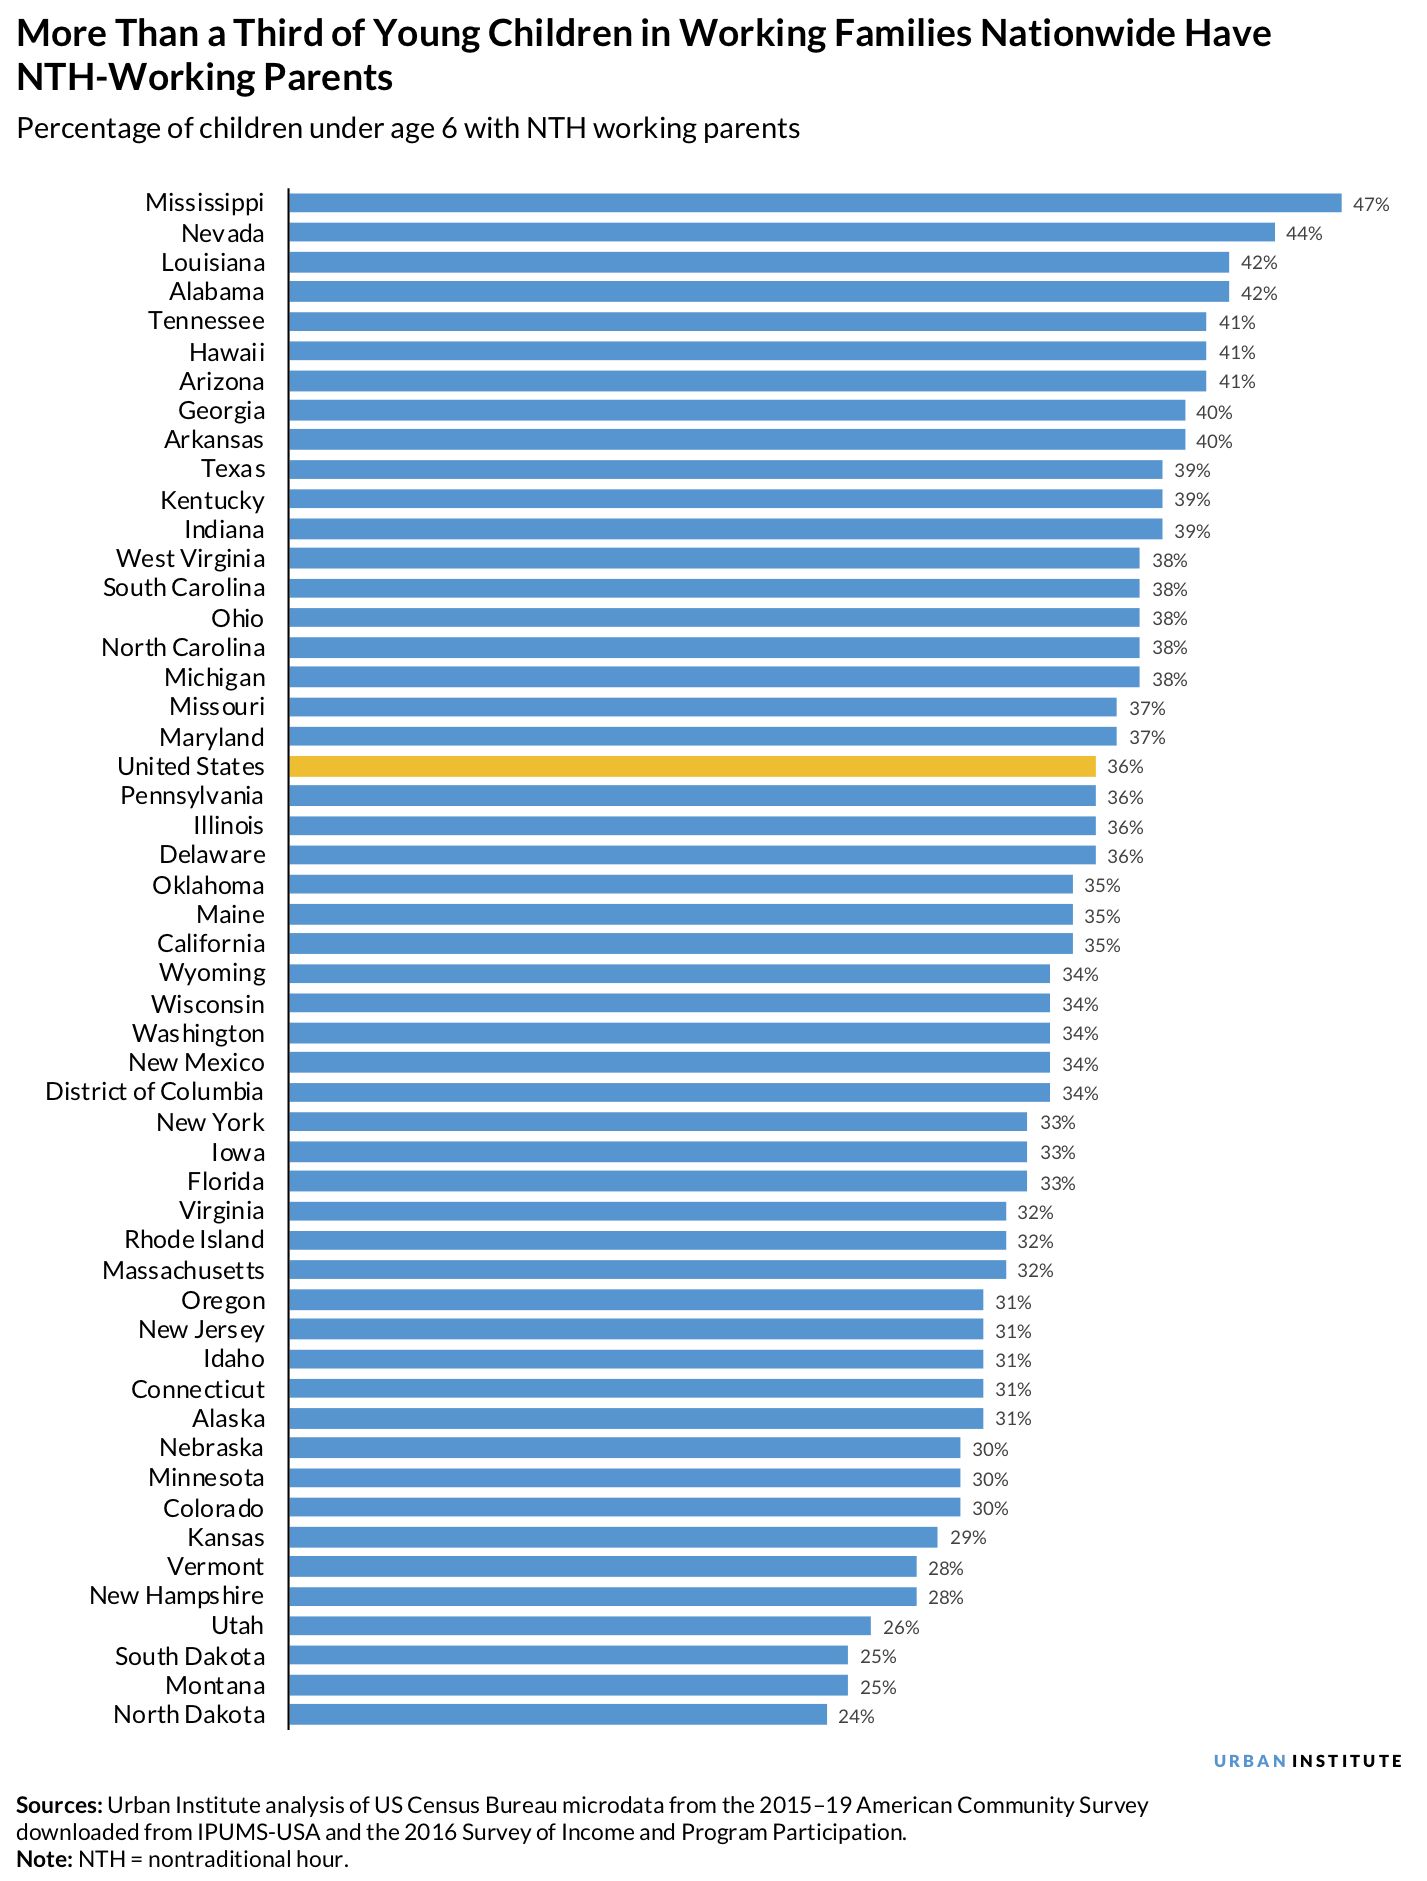 A bar chart showing each state’s share of children young than 6 in working families with parents who work nontraditional hours compared to the national share.